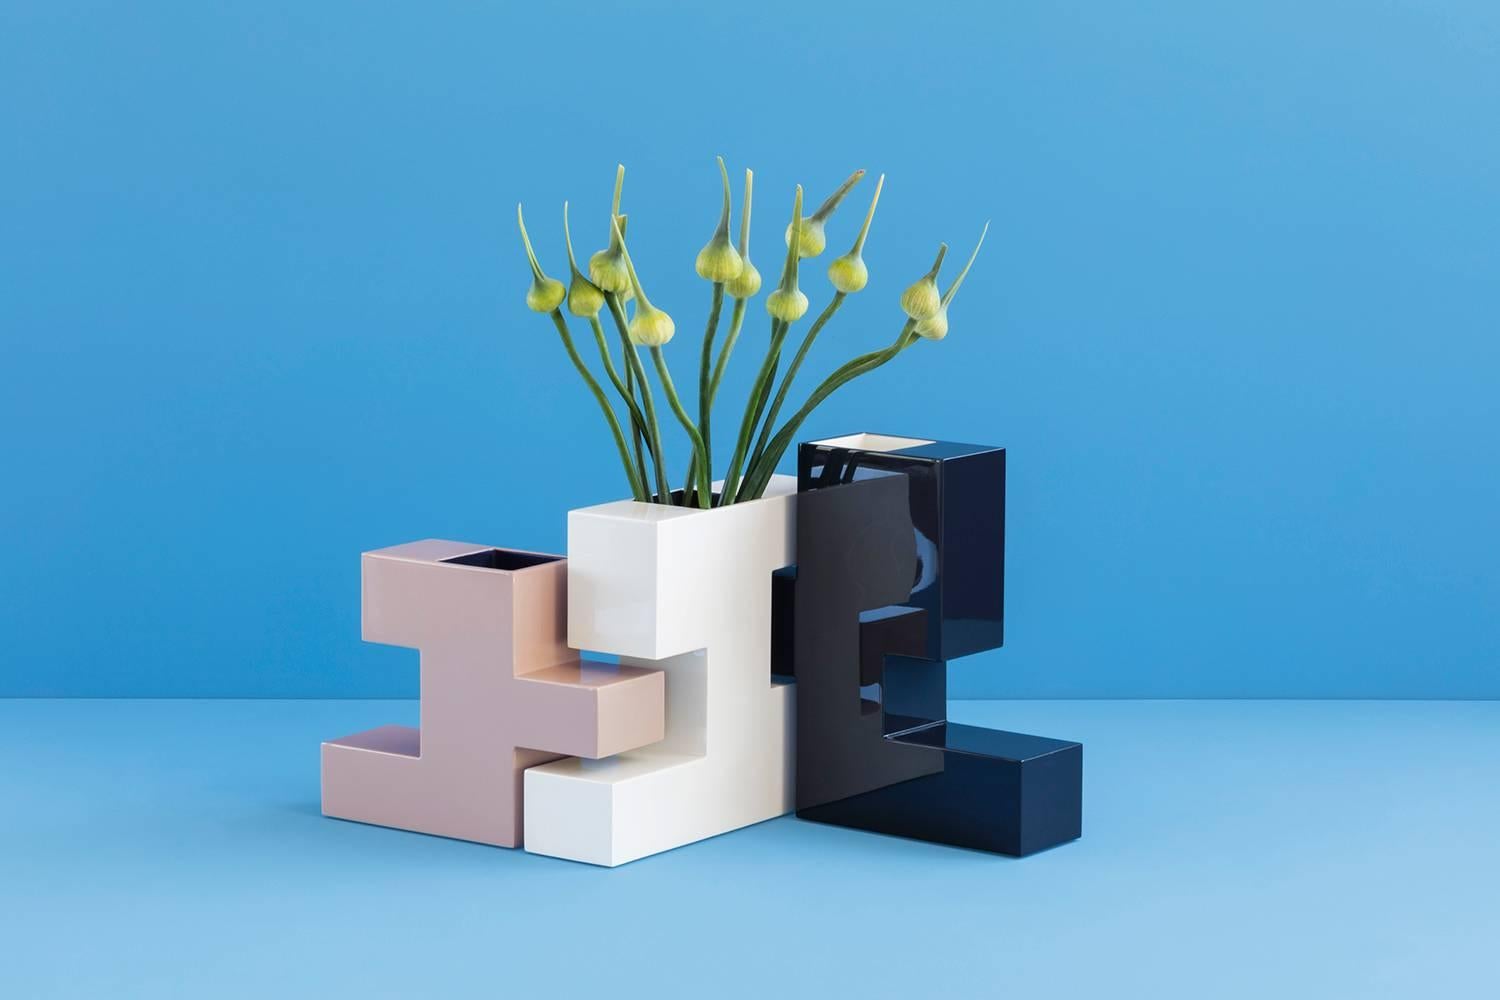 A set of three watertight, lacquer vases that fit together like a puzzle.
Can be sold as a set or separately.
Measures: 
Dark grey vase with cream interior: 12